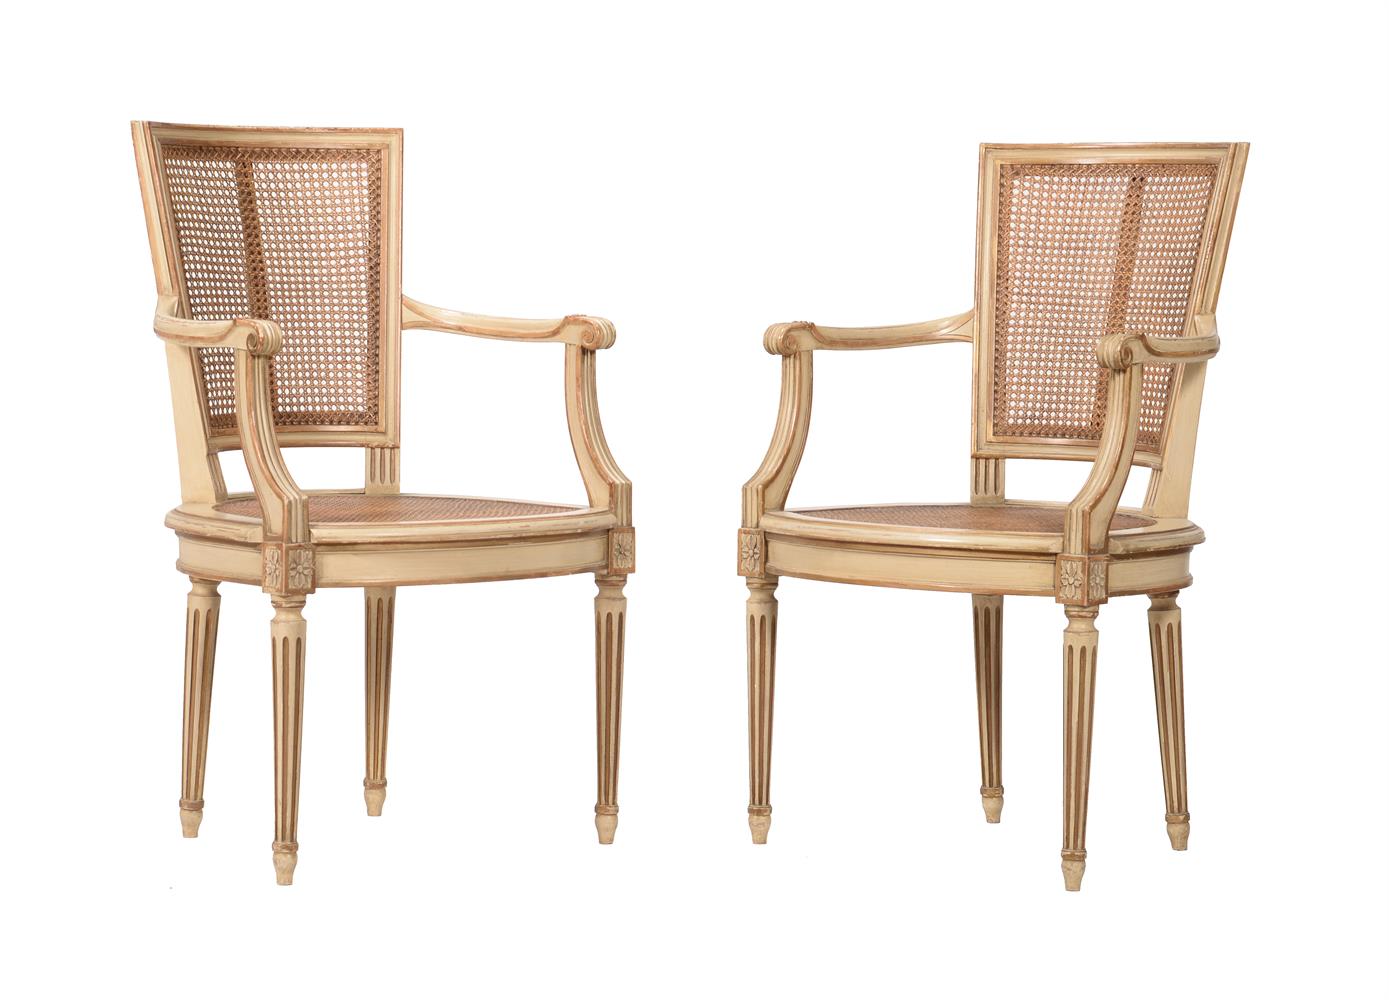 A SET OF TEN PAINTED WOOD DINING CHAIRS IN FRENCH TRANSITIONAL STYLE - Image 2 of 7